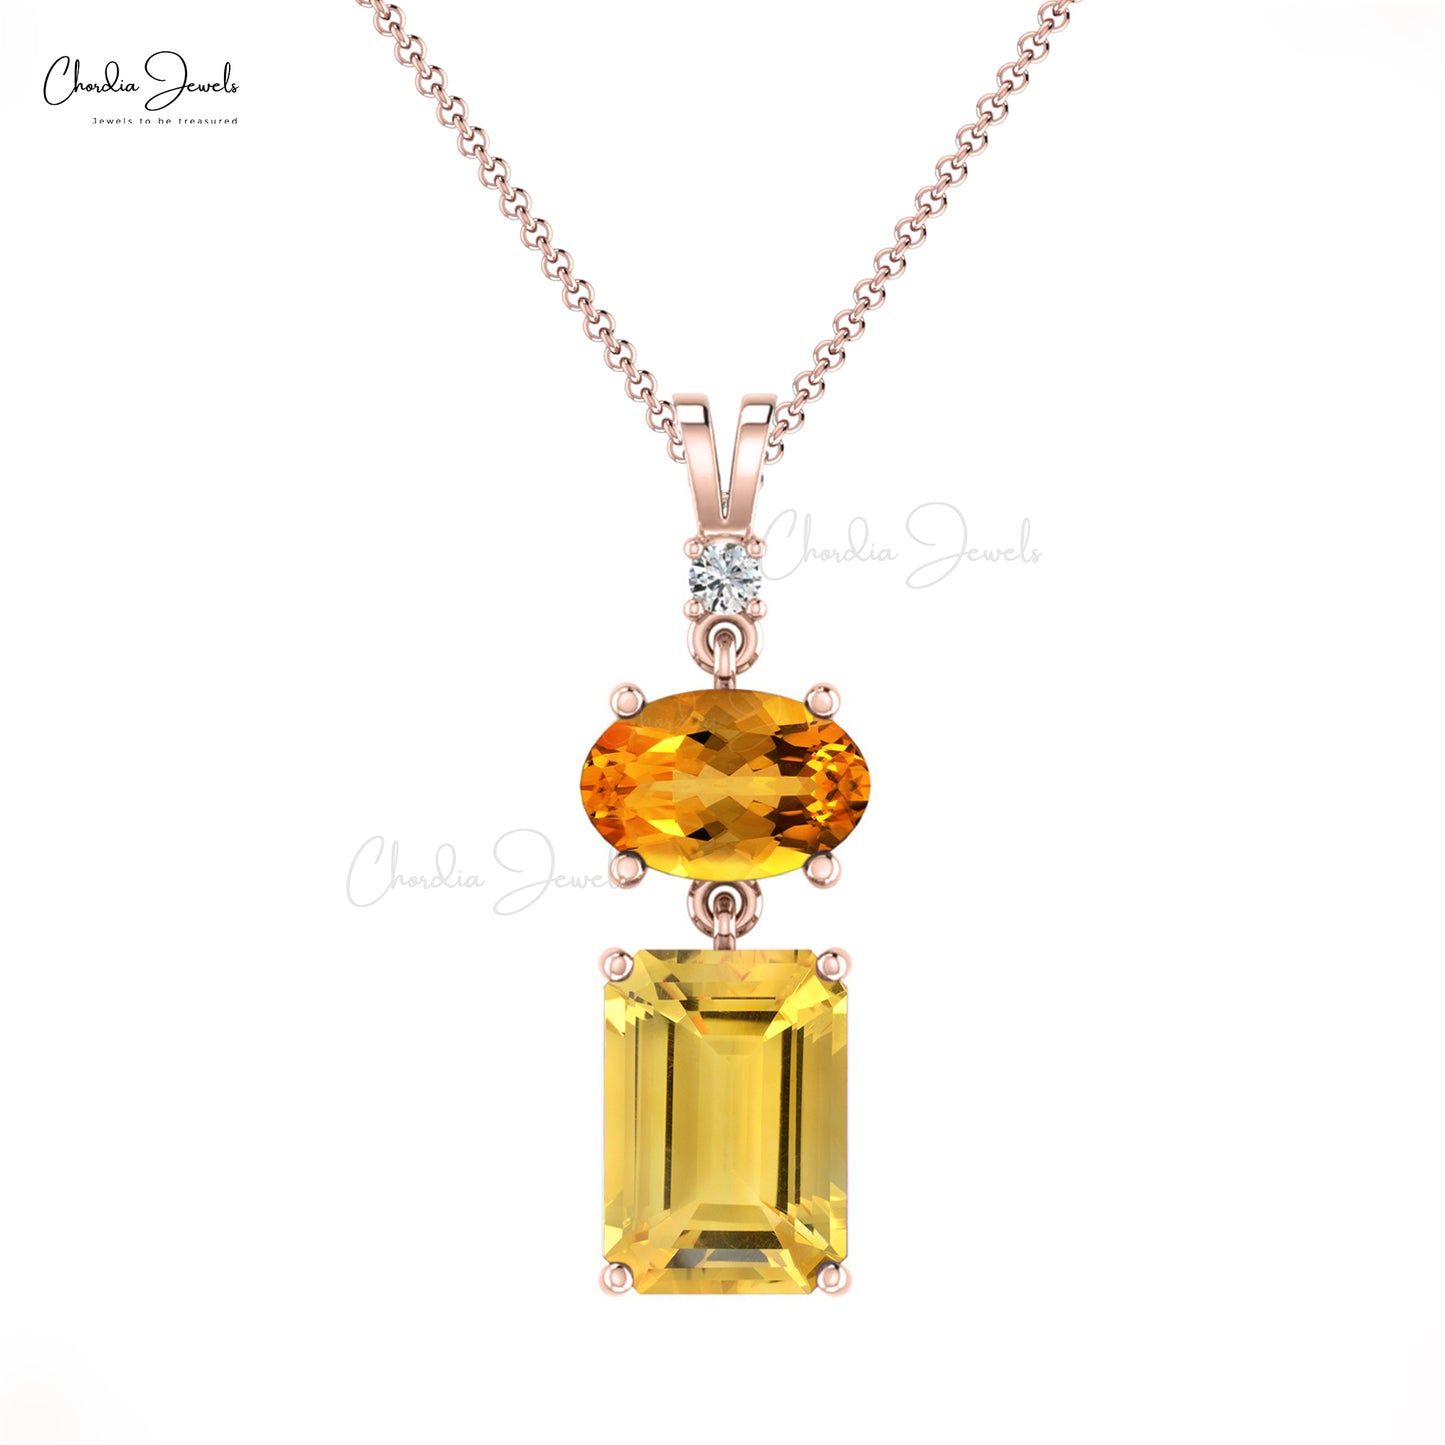 Real 14k Gold April Birthstone Diamond Wedding Pendant 1.3 Ct 4-Prong Set November Birthstone Natural Citrine Pendant Light Weight Jewelry For Her